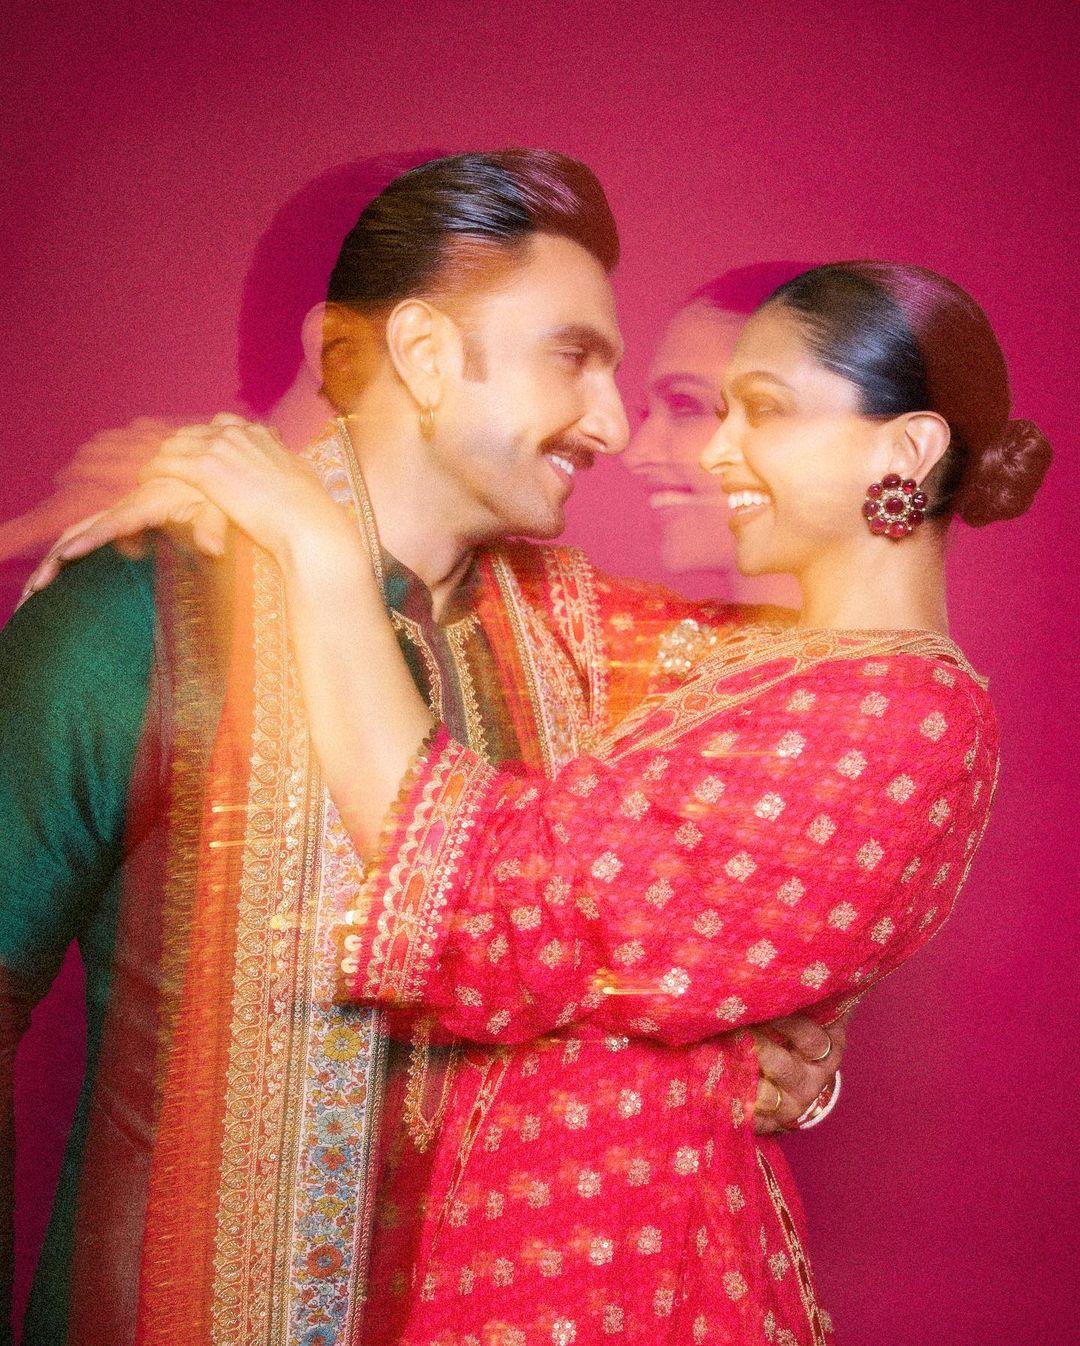 Deepika and Ranveer revealed their wedding video on Koffee With Karan 8. In the clip, the actress can be heard saying, 